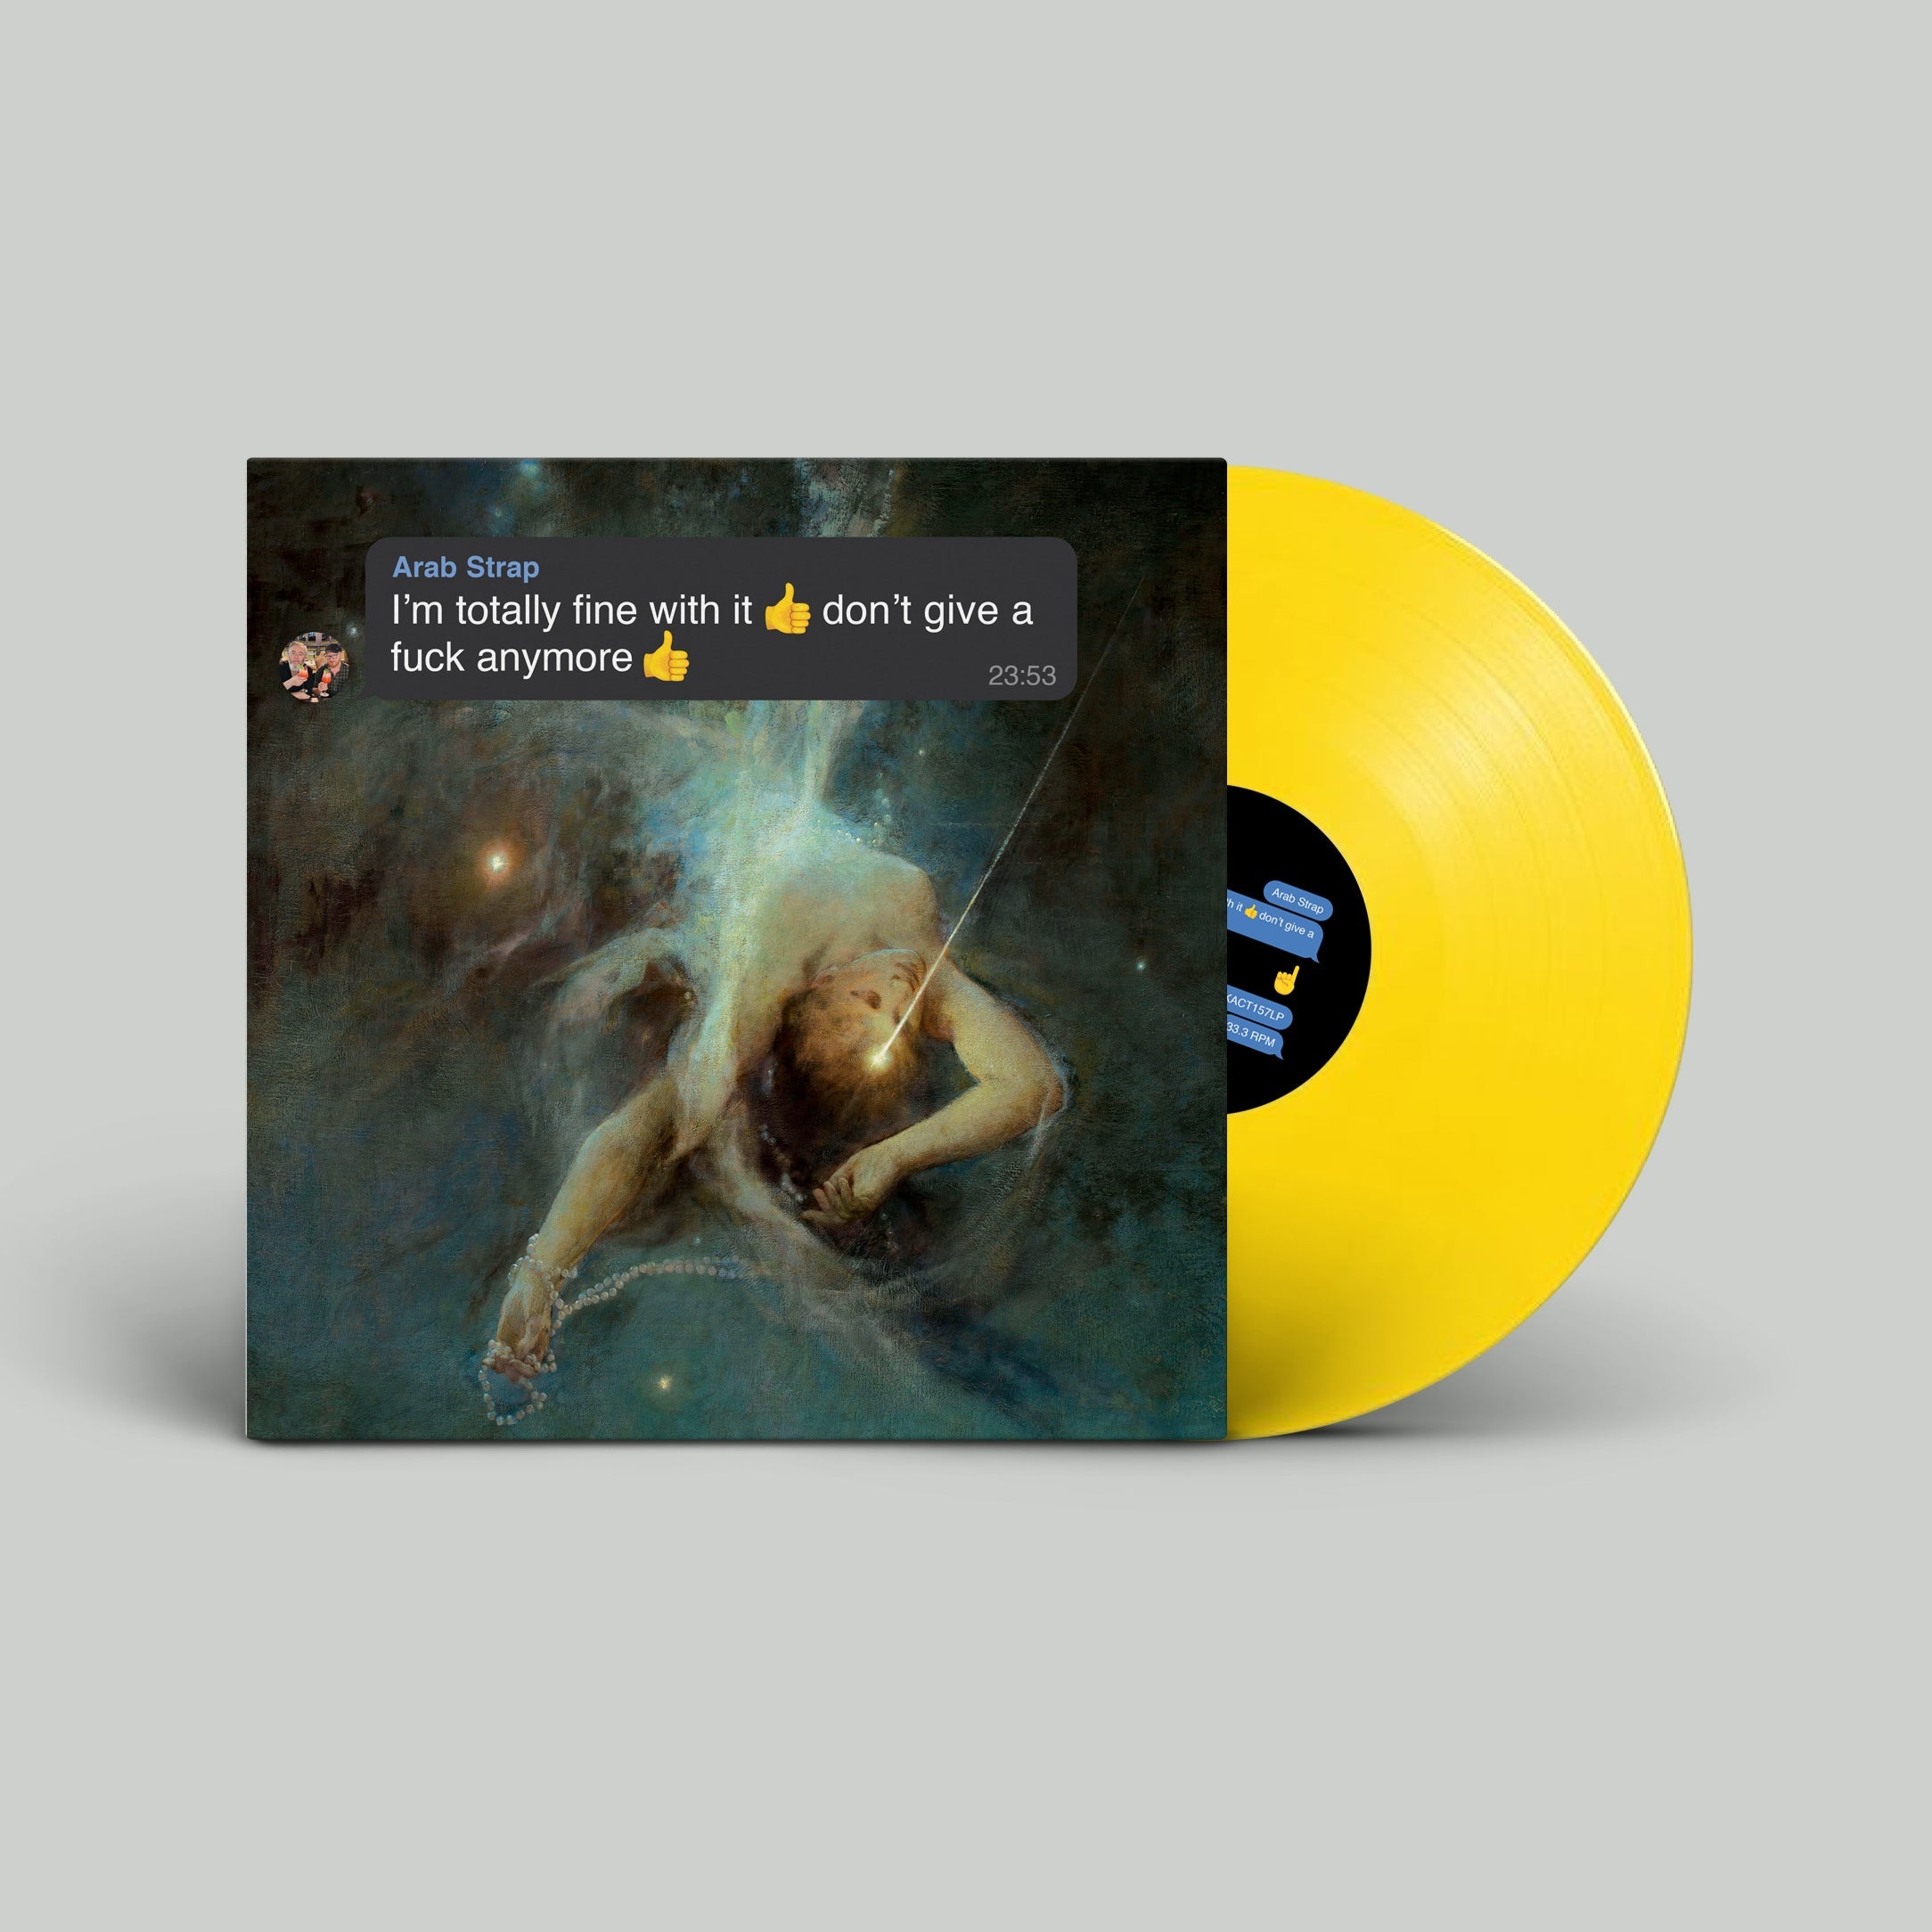 I’m totally fine with it 👍don’t give a fuck anymore 👍: Limited Emoji Yellow Vinyl LP + Signed Double-Sided Print